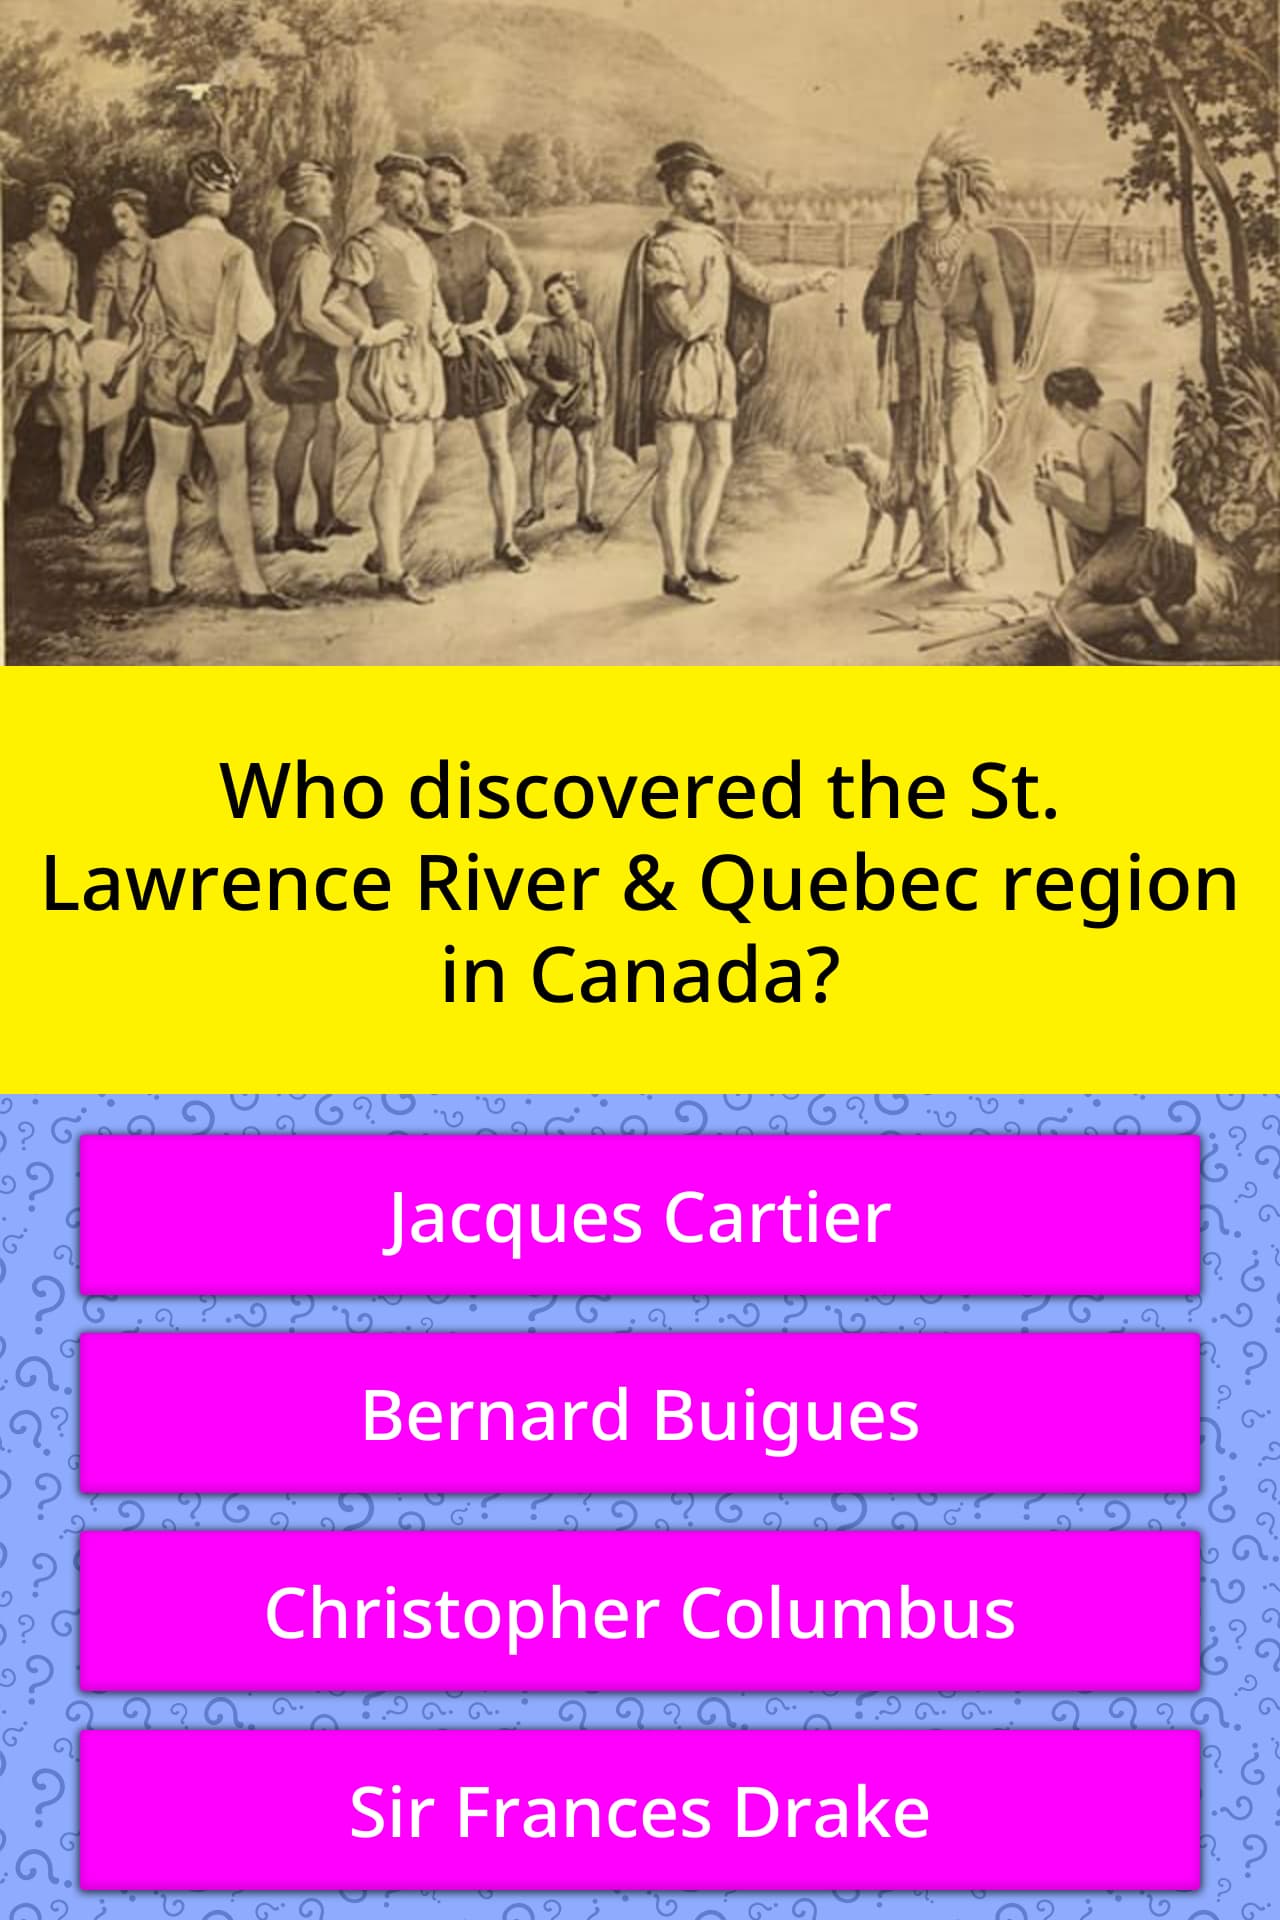 discovered st lawrence river